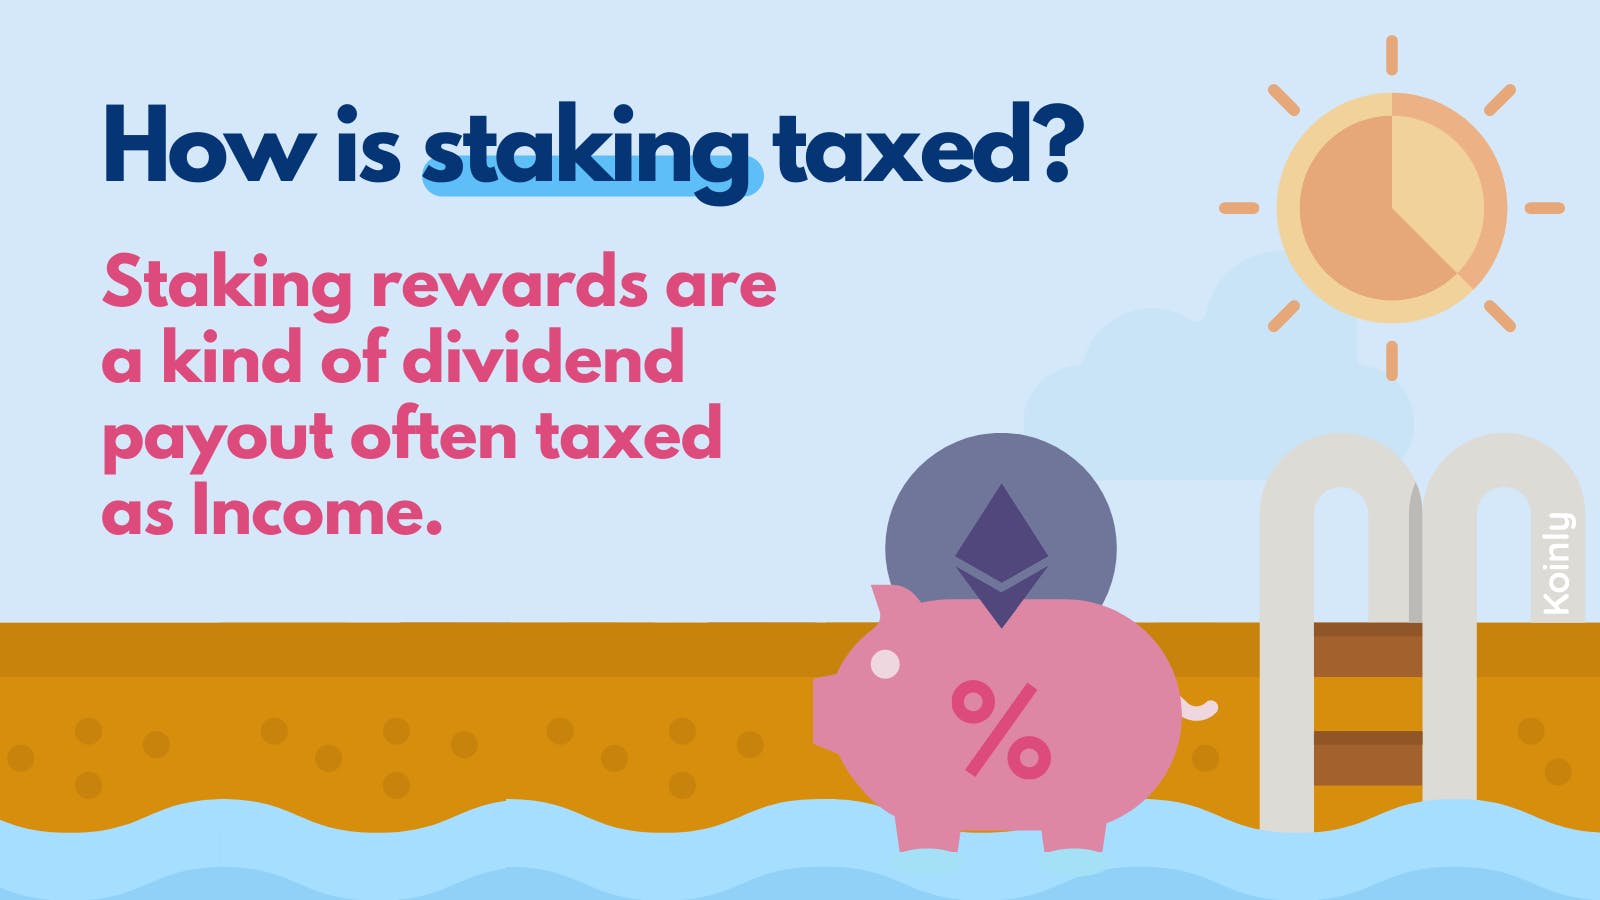 How are staking rewards taxed?